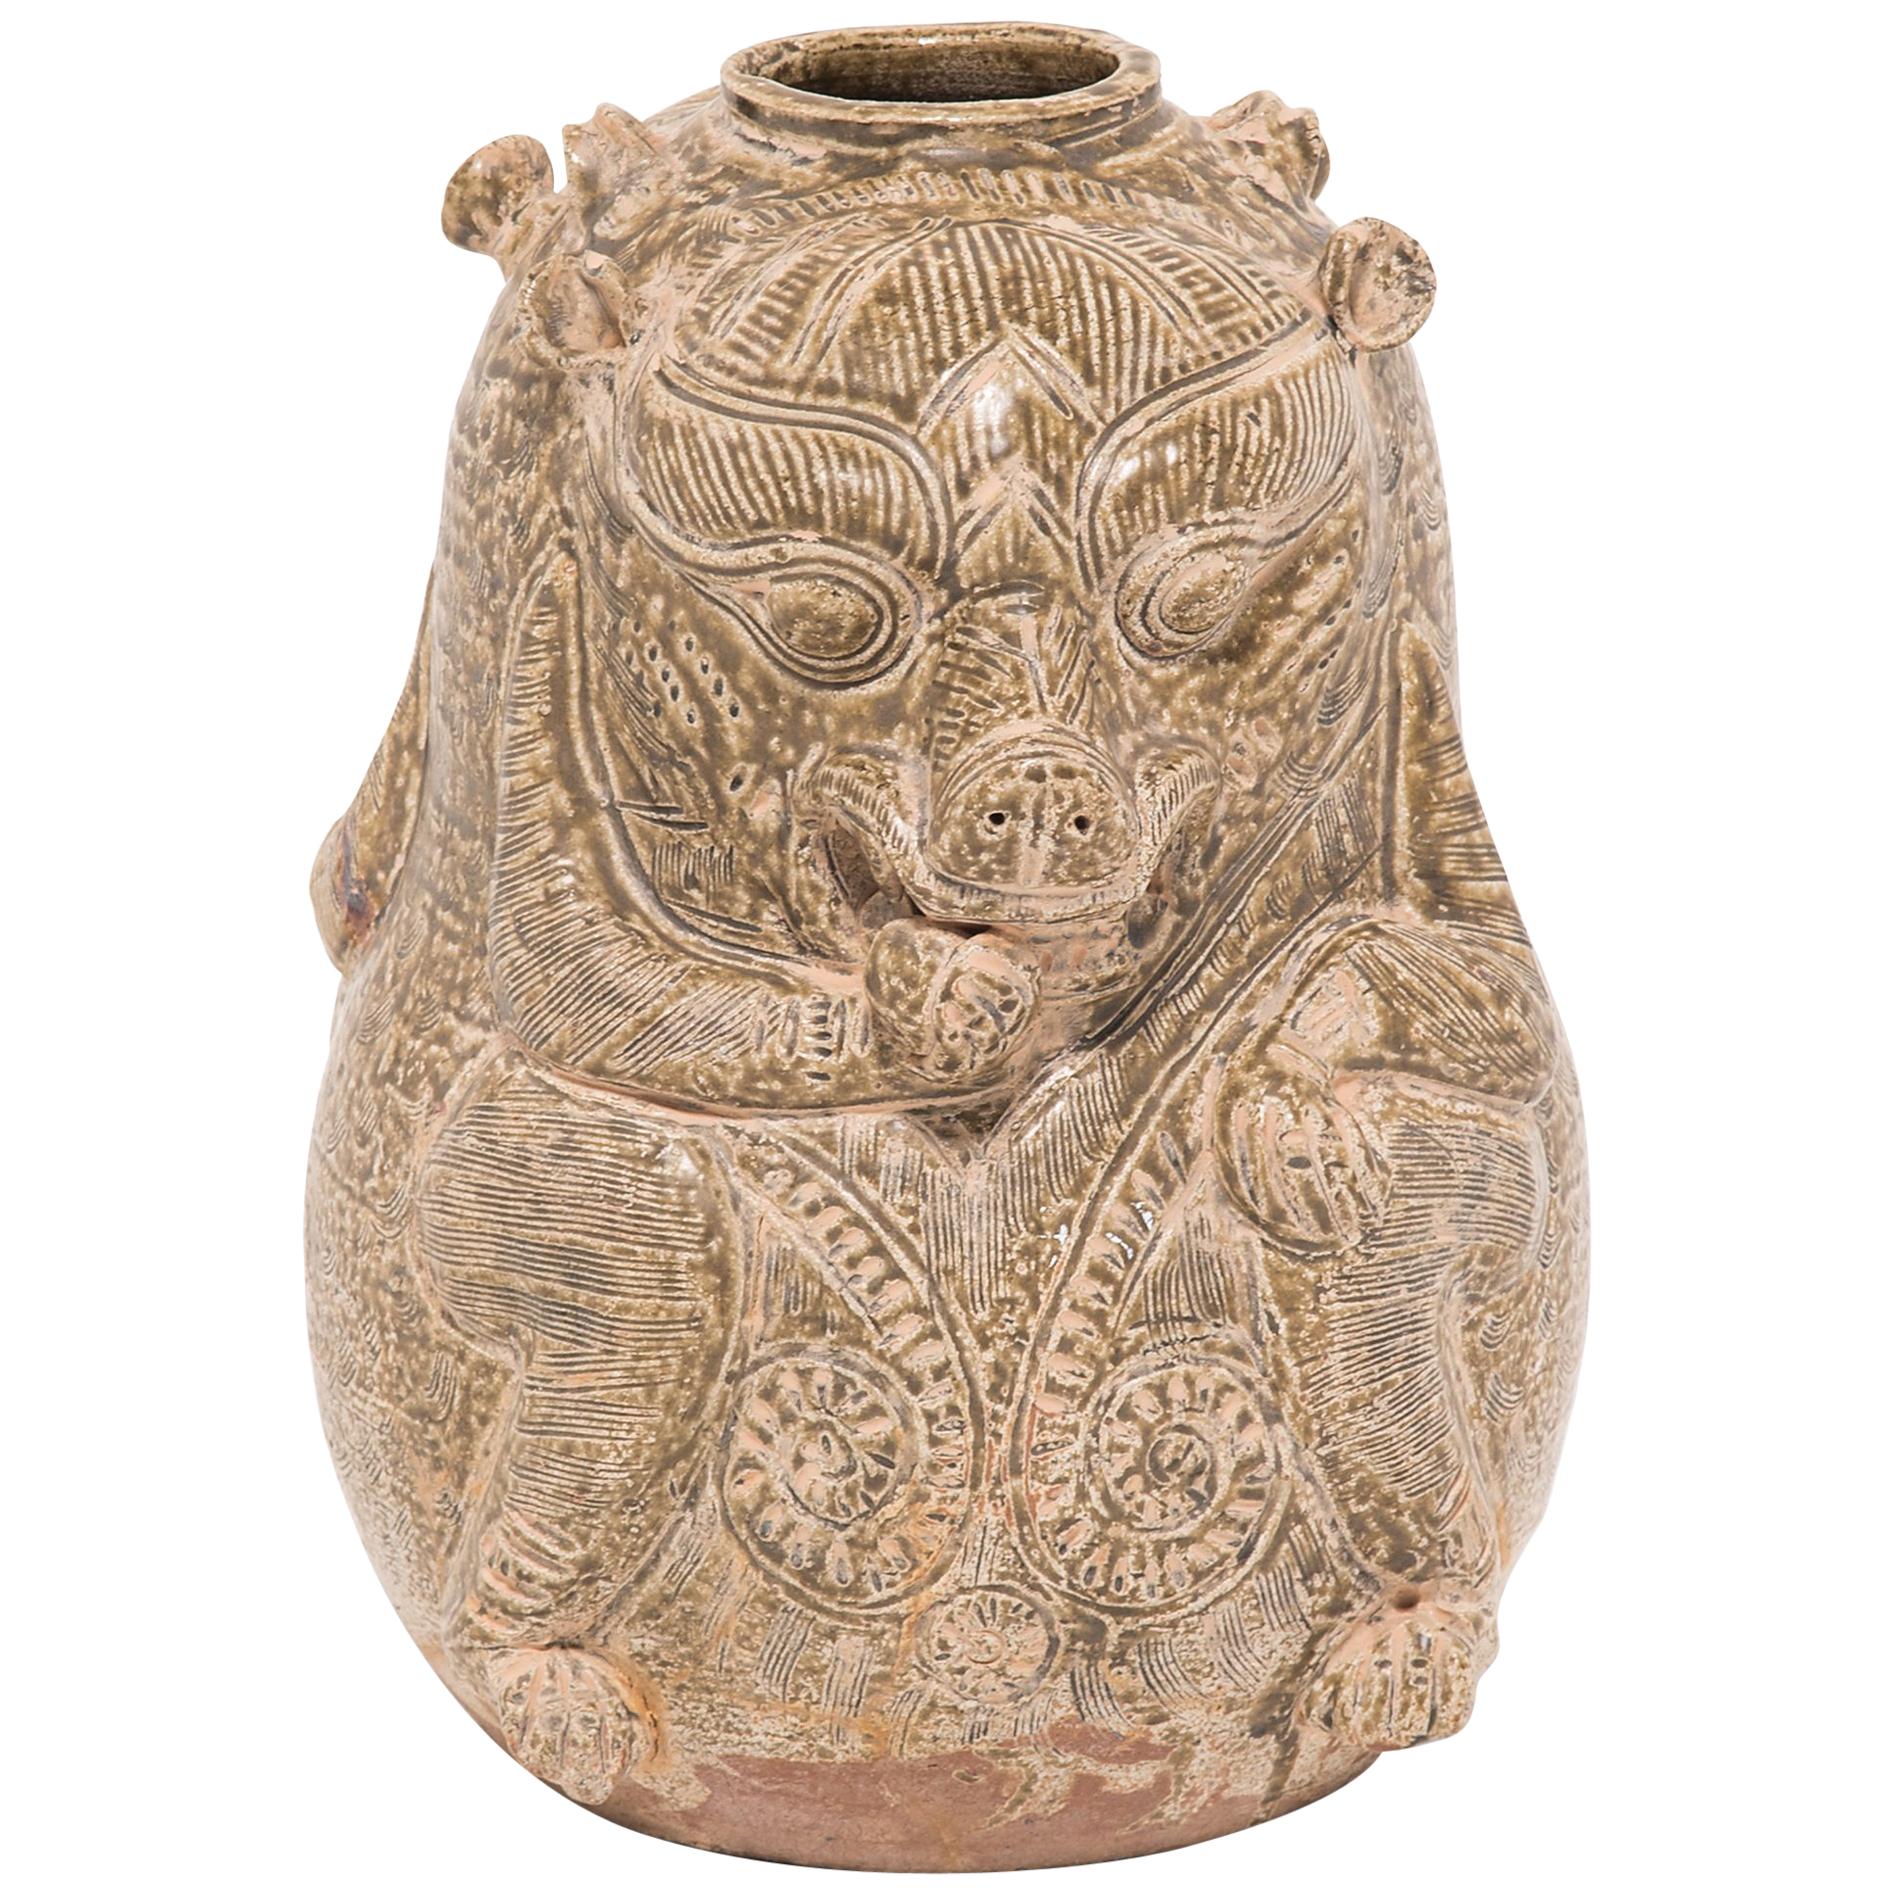 Chinese Twin Mythical Jar, c. 1900